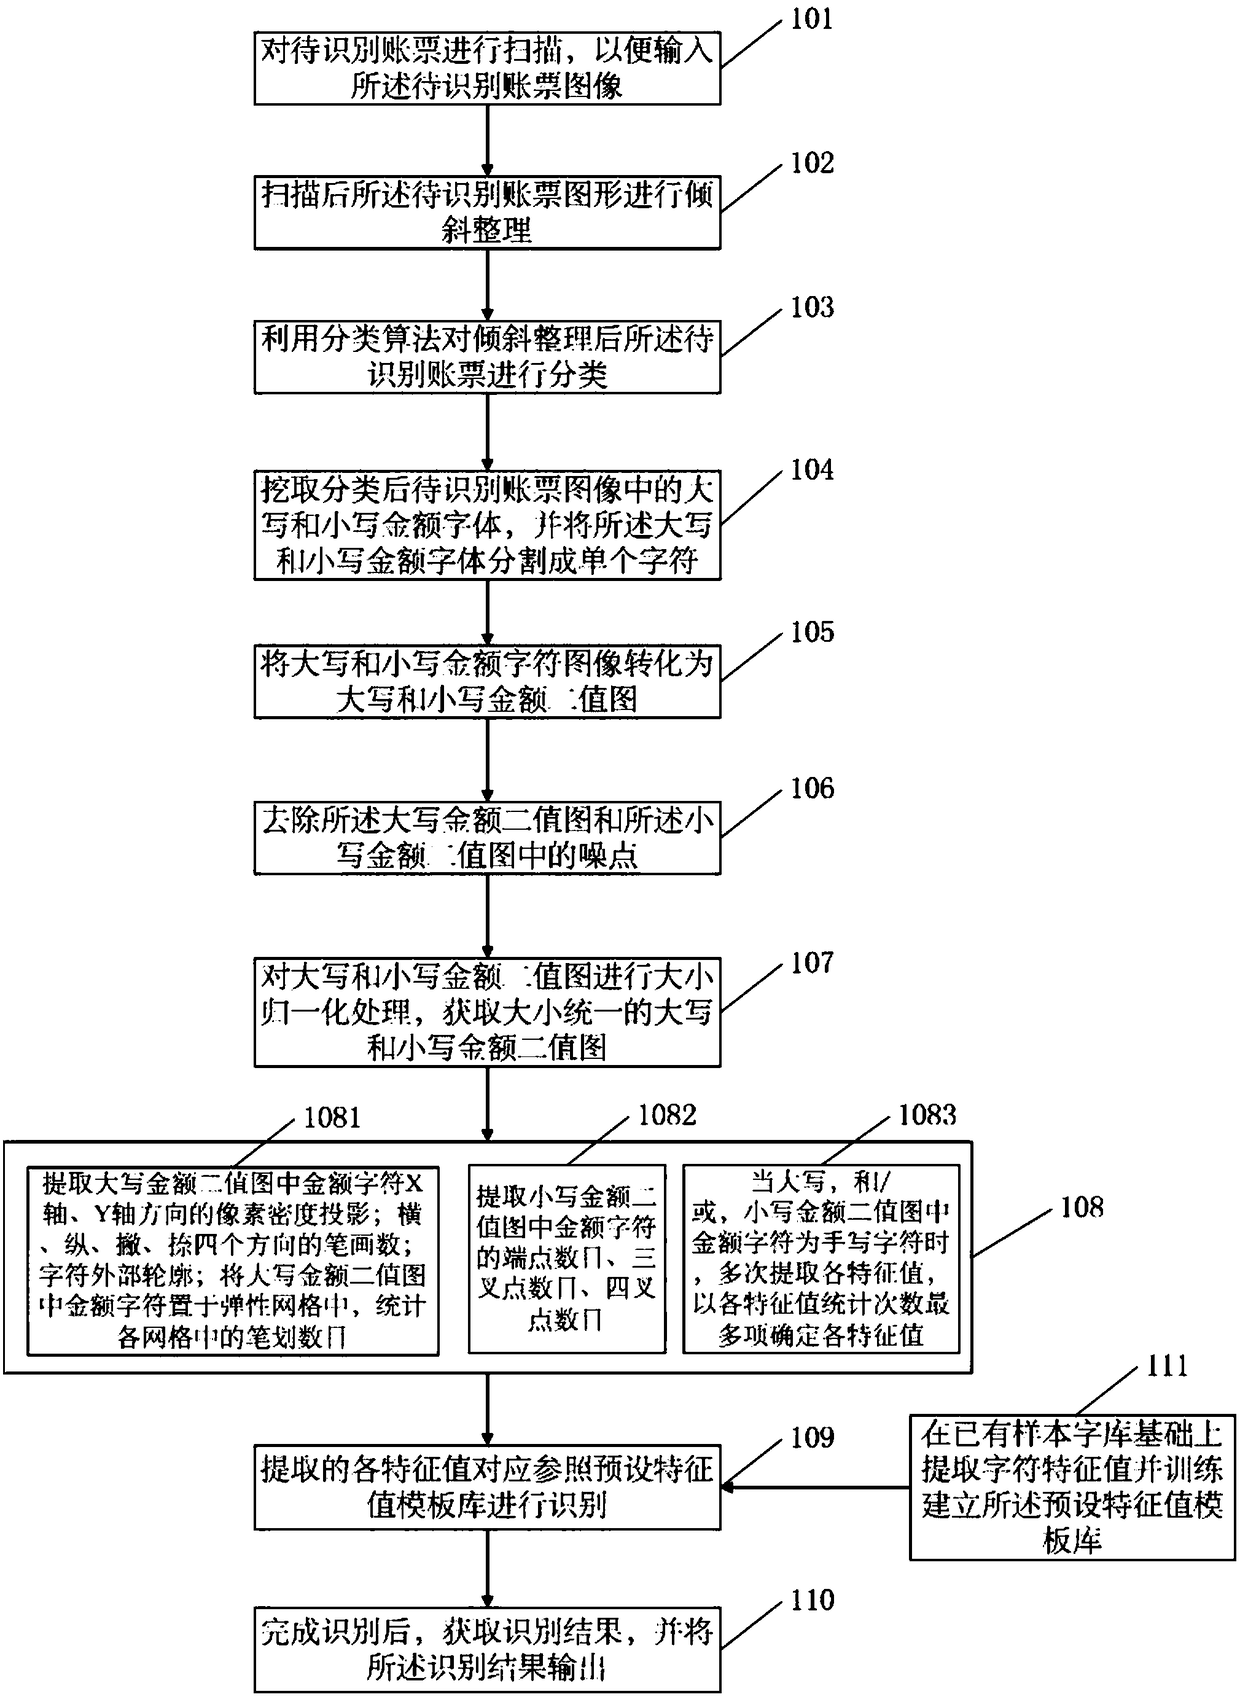 A method and device for optical recognition of bills